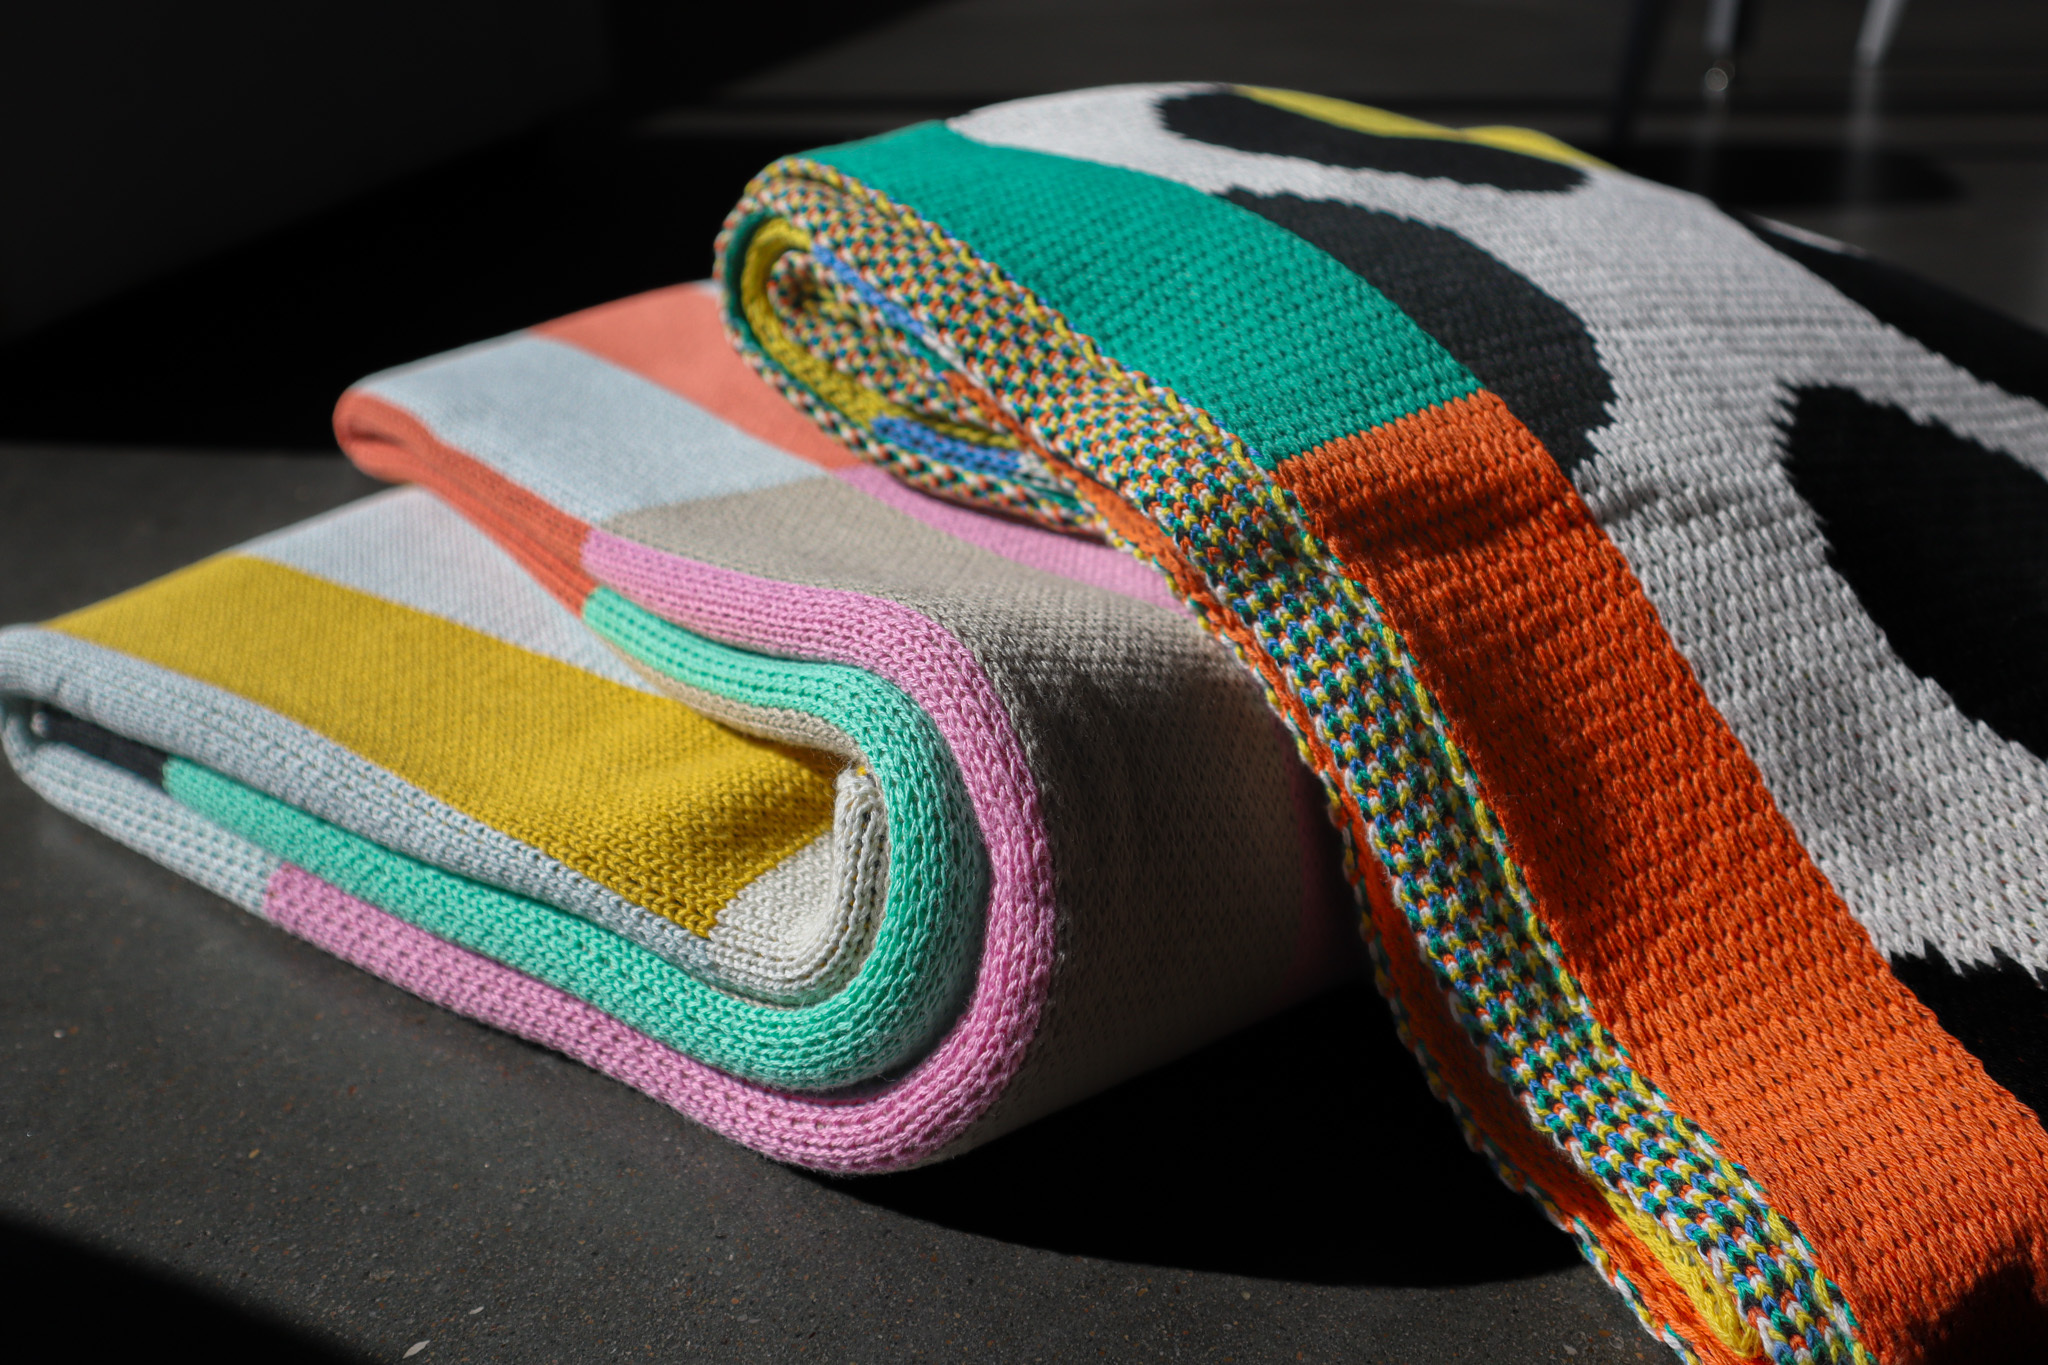 Two colorfully patterned woven blankets are sitting in a stack on a cement floor